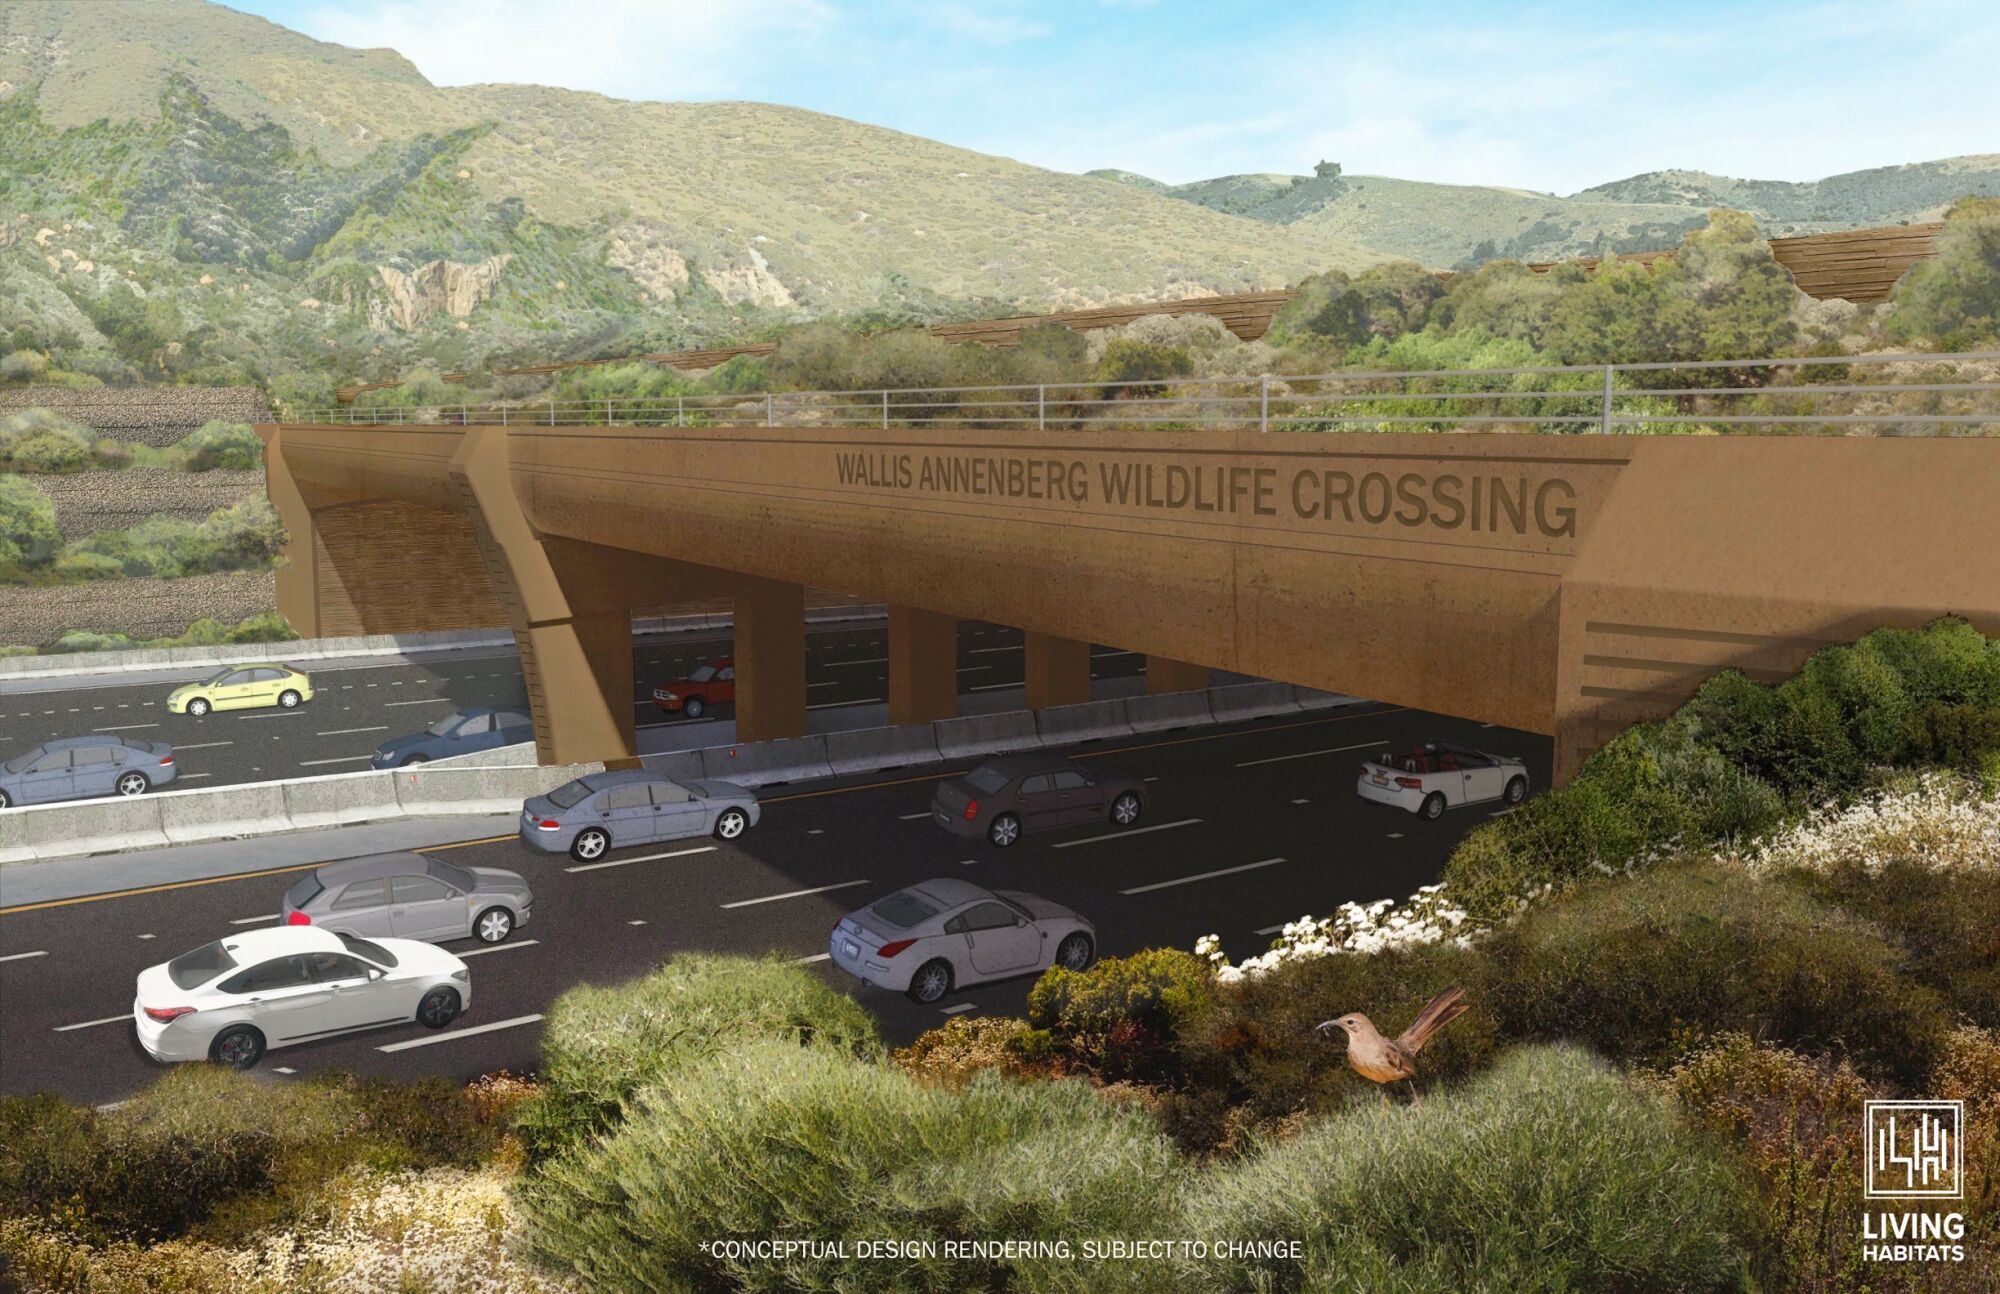 An artist's rendering of what the Wallis Annenberg Wildlife Crossing will look like once it’s finished.